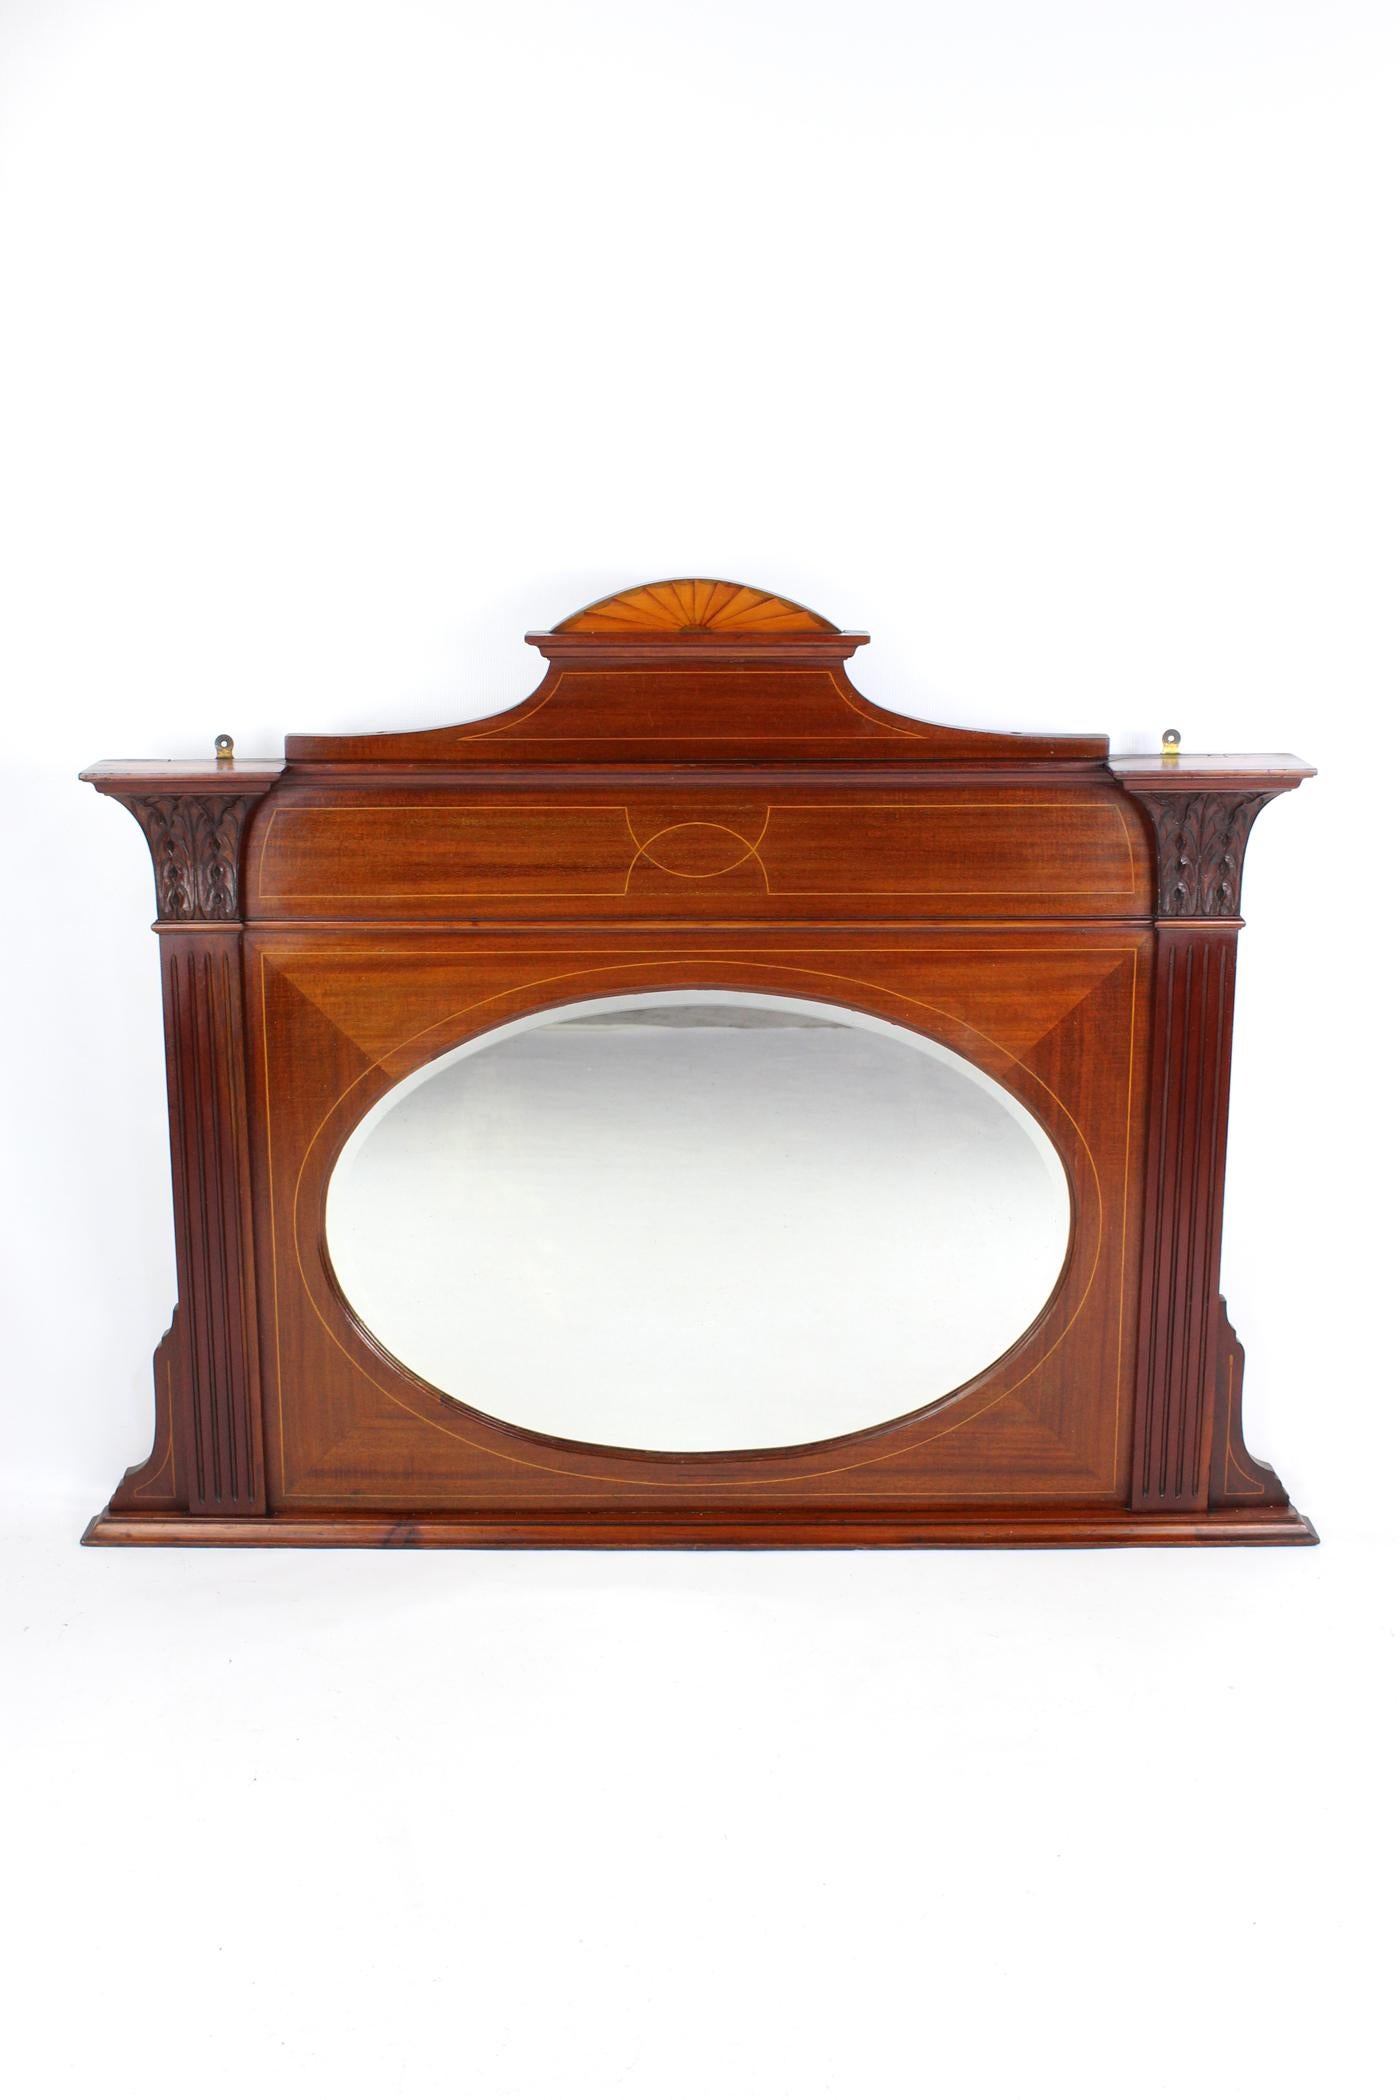 A handsome large antique Edwardian mahogany and inlaid framed overmantle mirror dating from circa 1905. With an oval bevelled mirror plate flanked by moulded pilasters with acanthus carved capitals. In a mahogany veneer, beautifully figured with